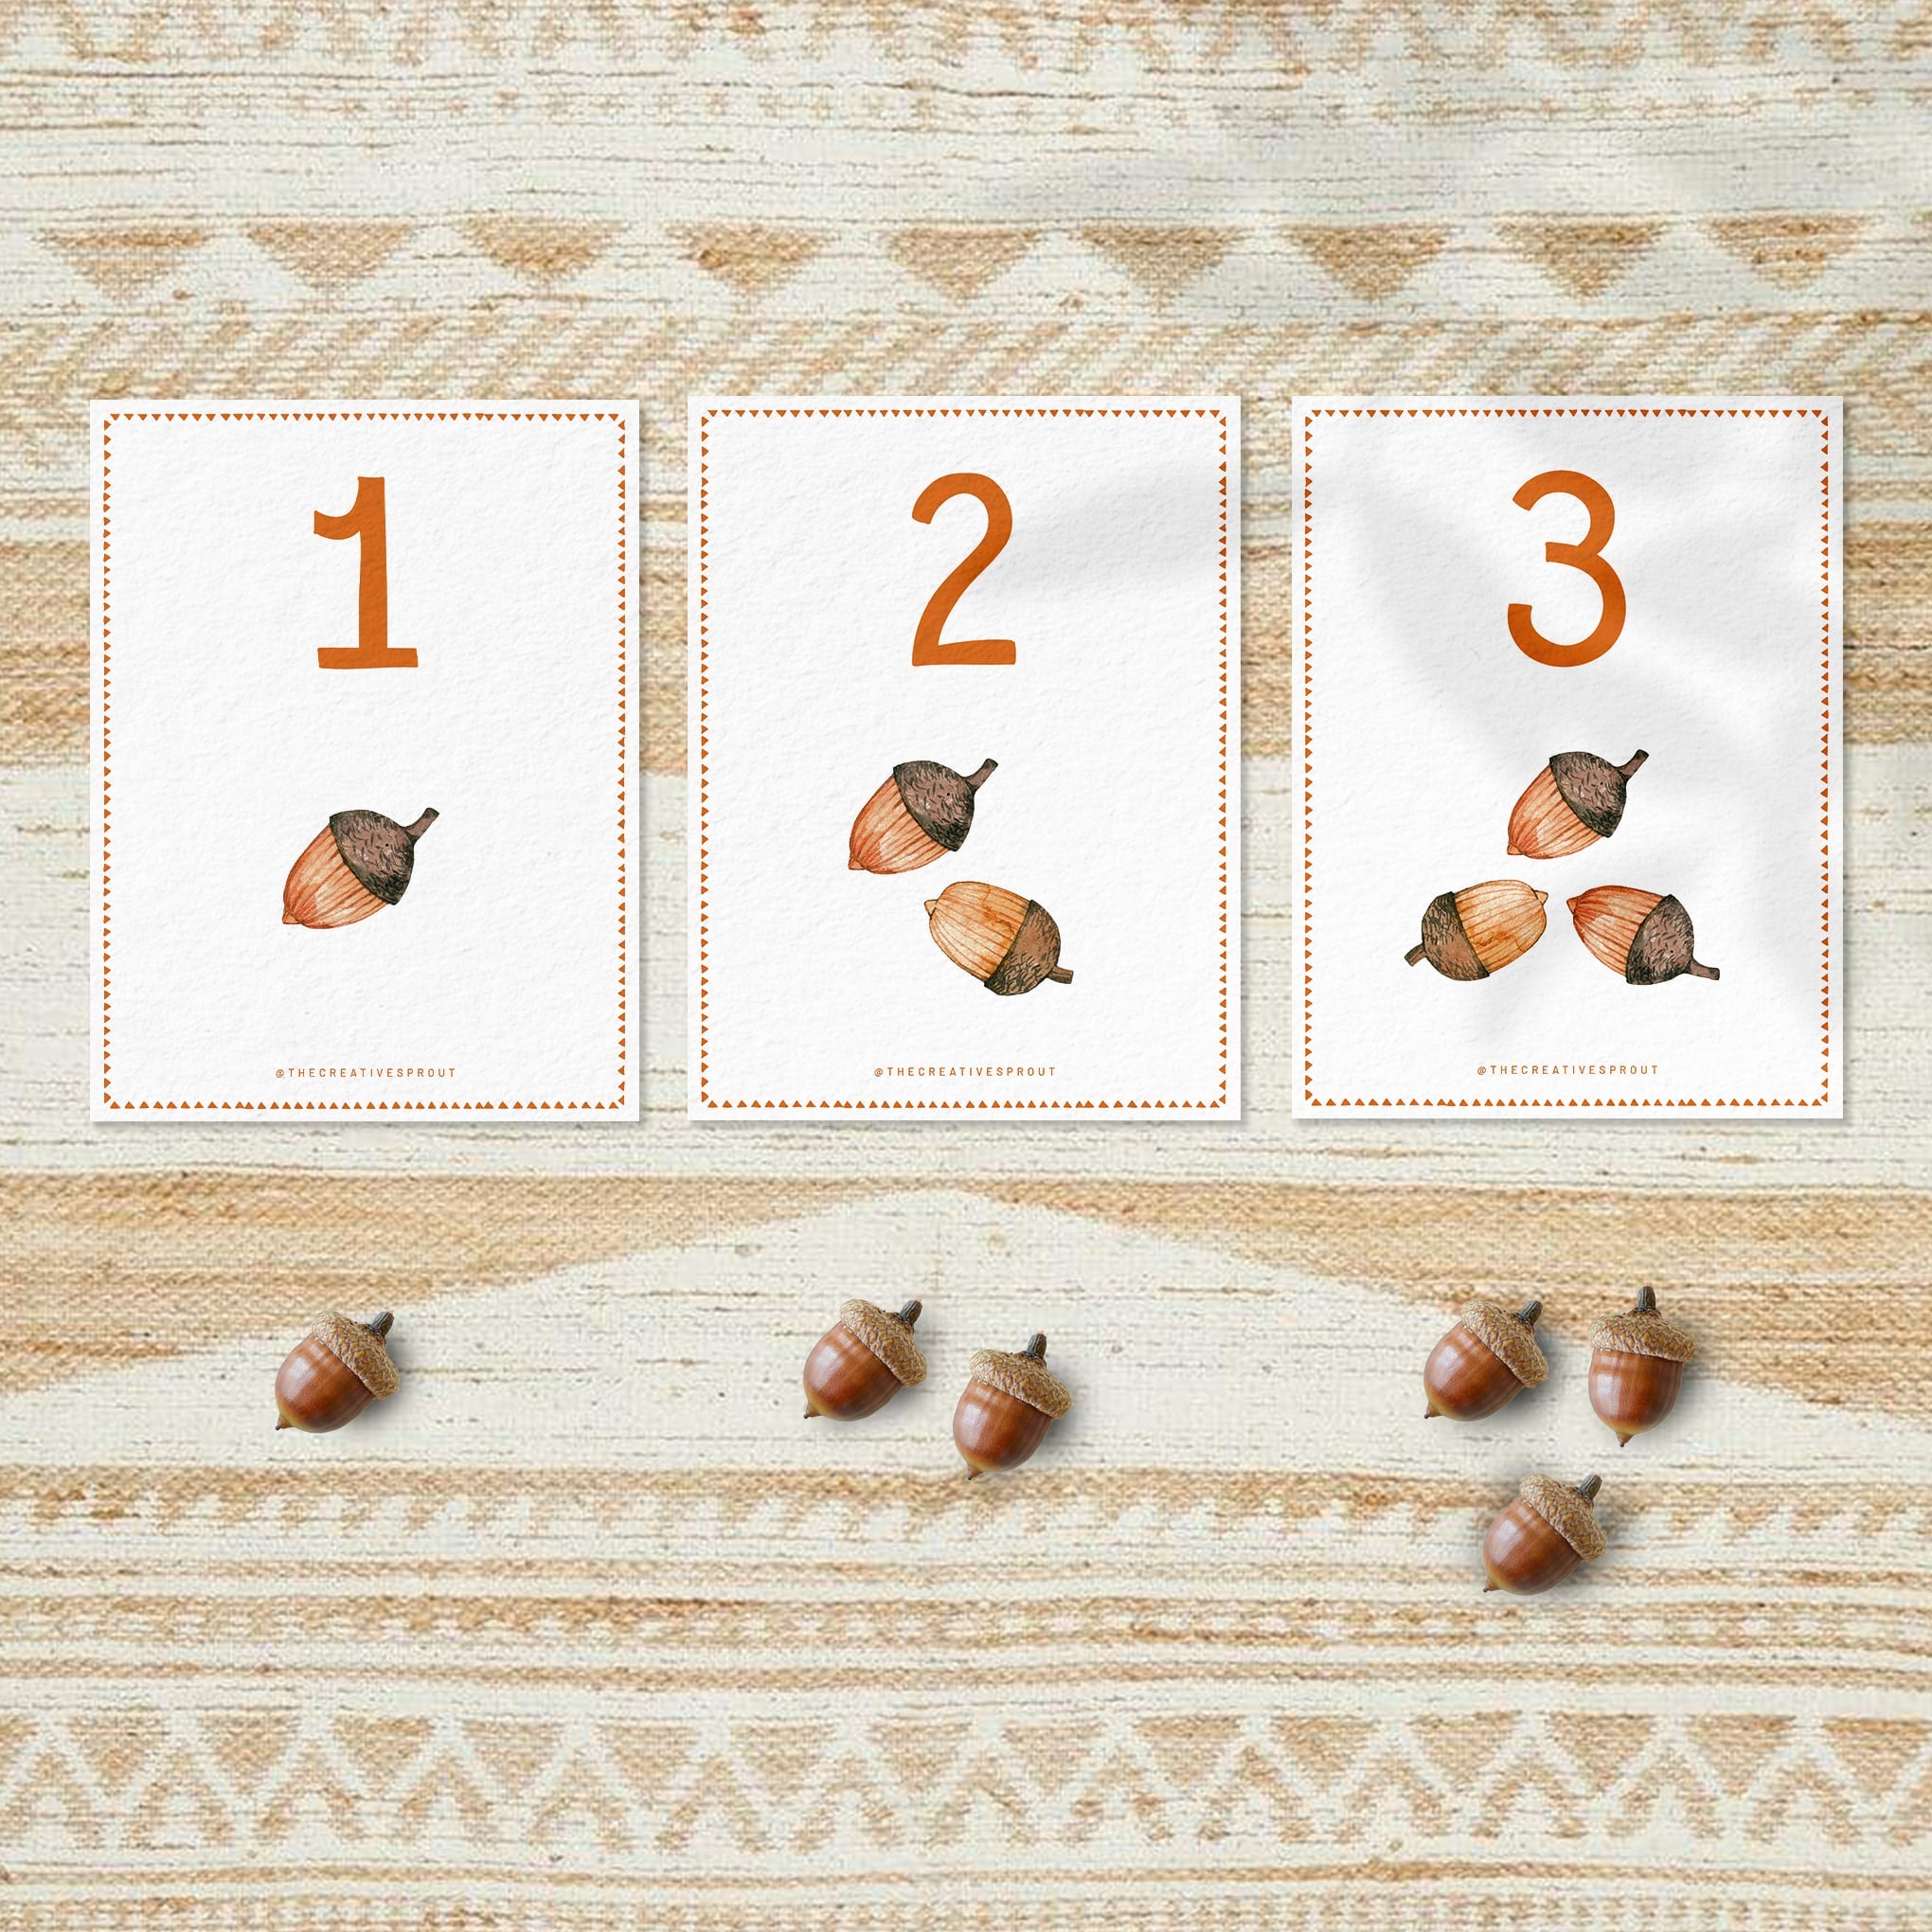 montessori counting cards for toddlers with seasons theme